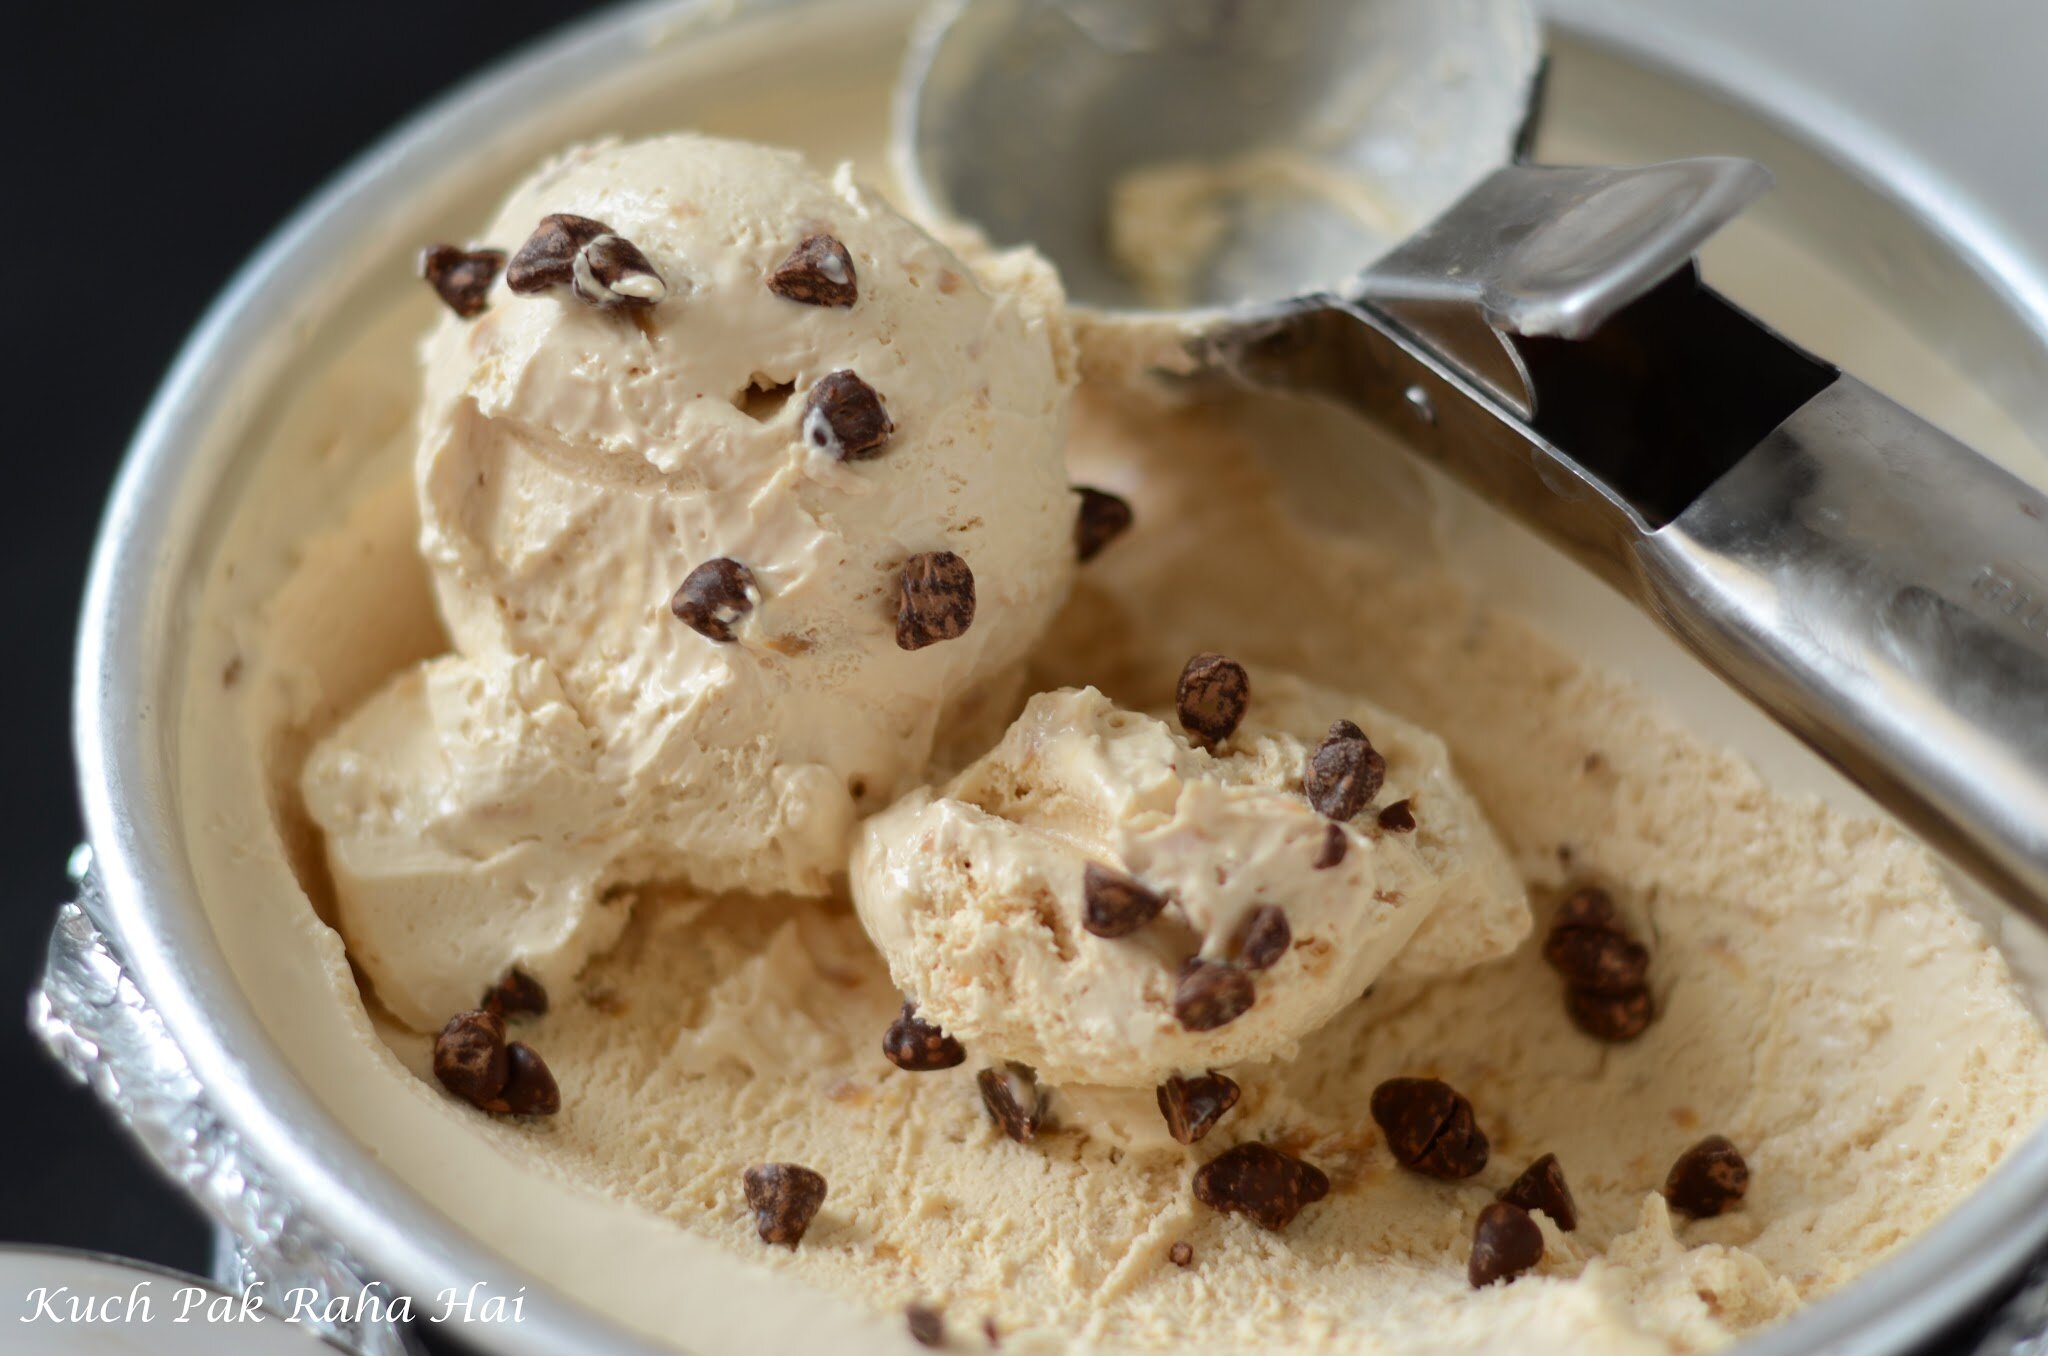 Dulce de leche ice cream with chocolate chips.